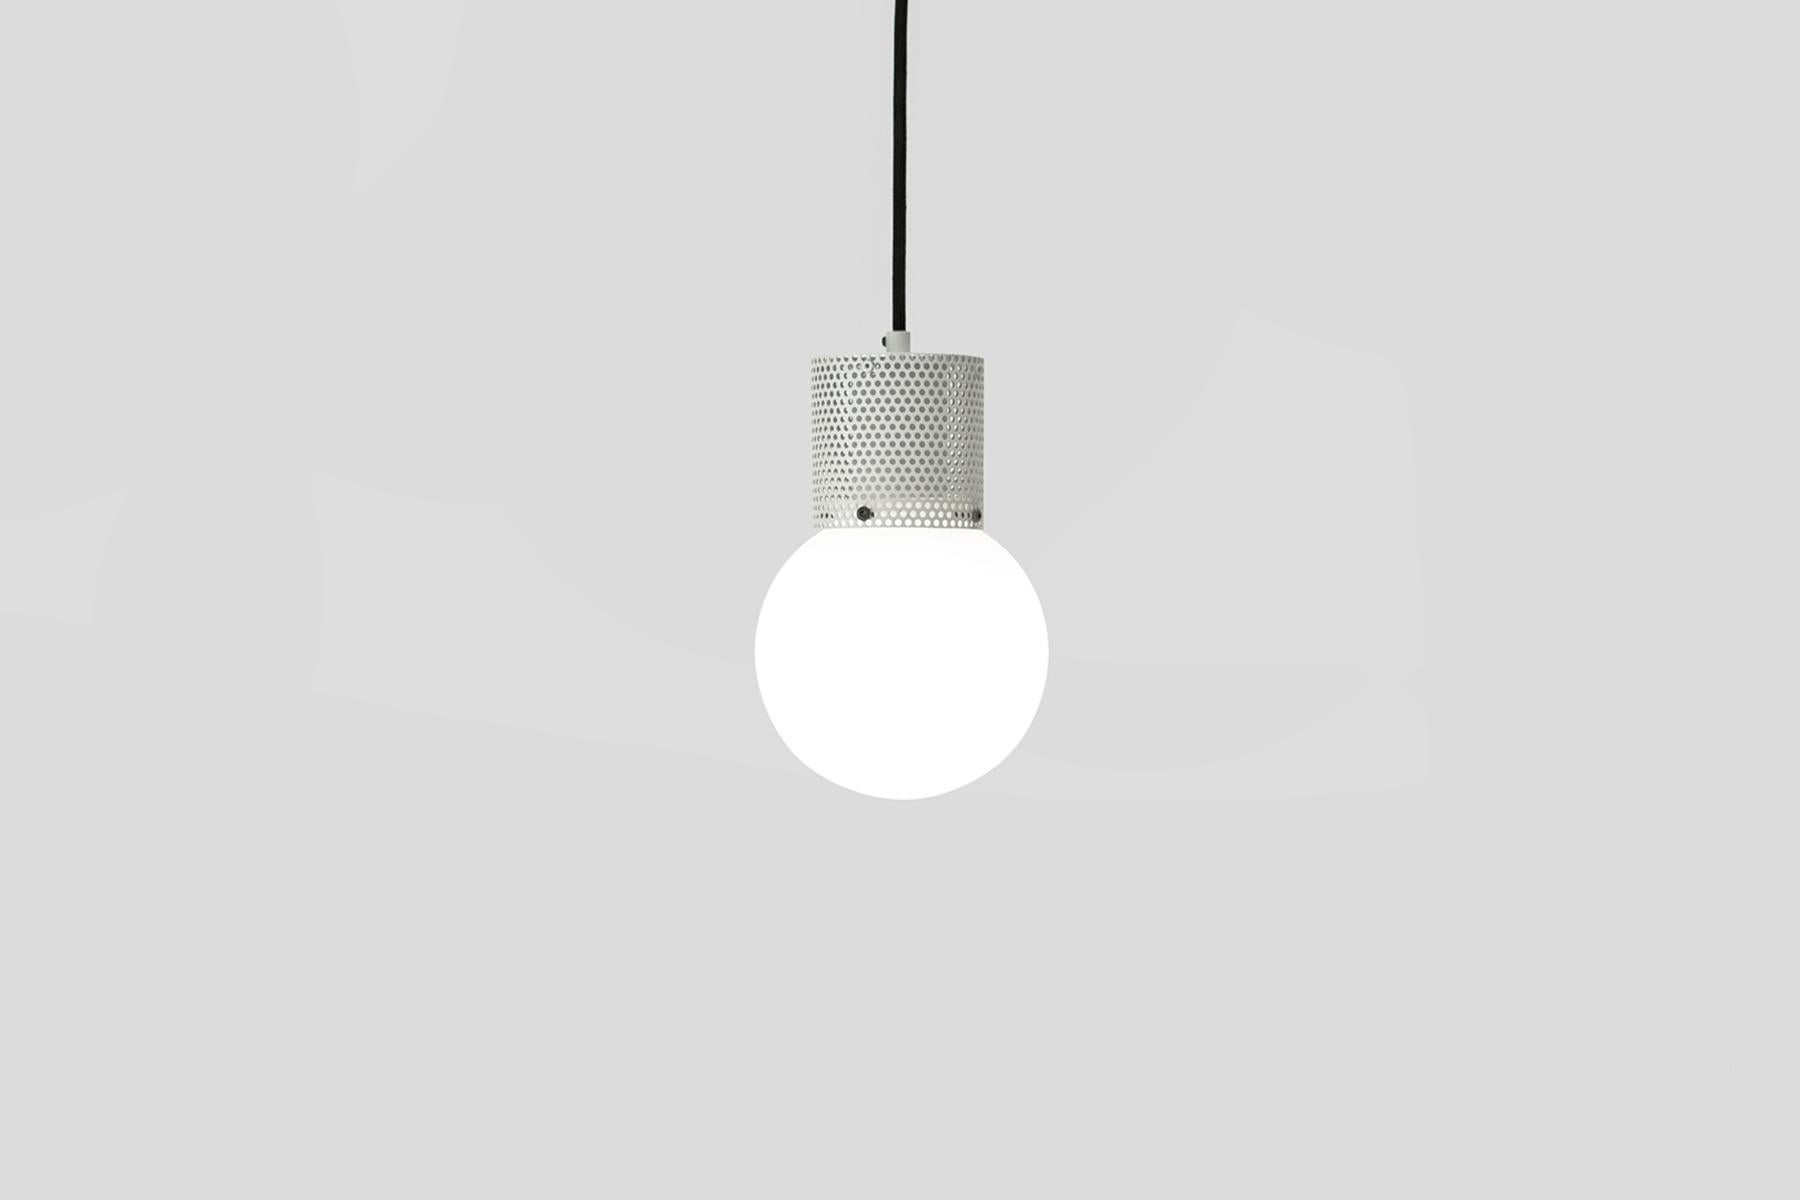 Perf Pendant Light Small-Black Perforated Tube, Glass Round Orb Shade In New Condition For Sale In Broadmeadows, Victoria